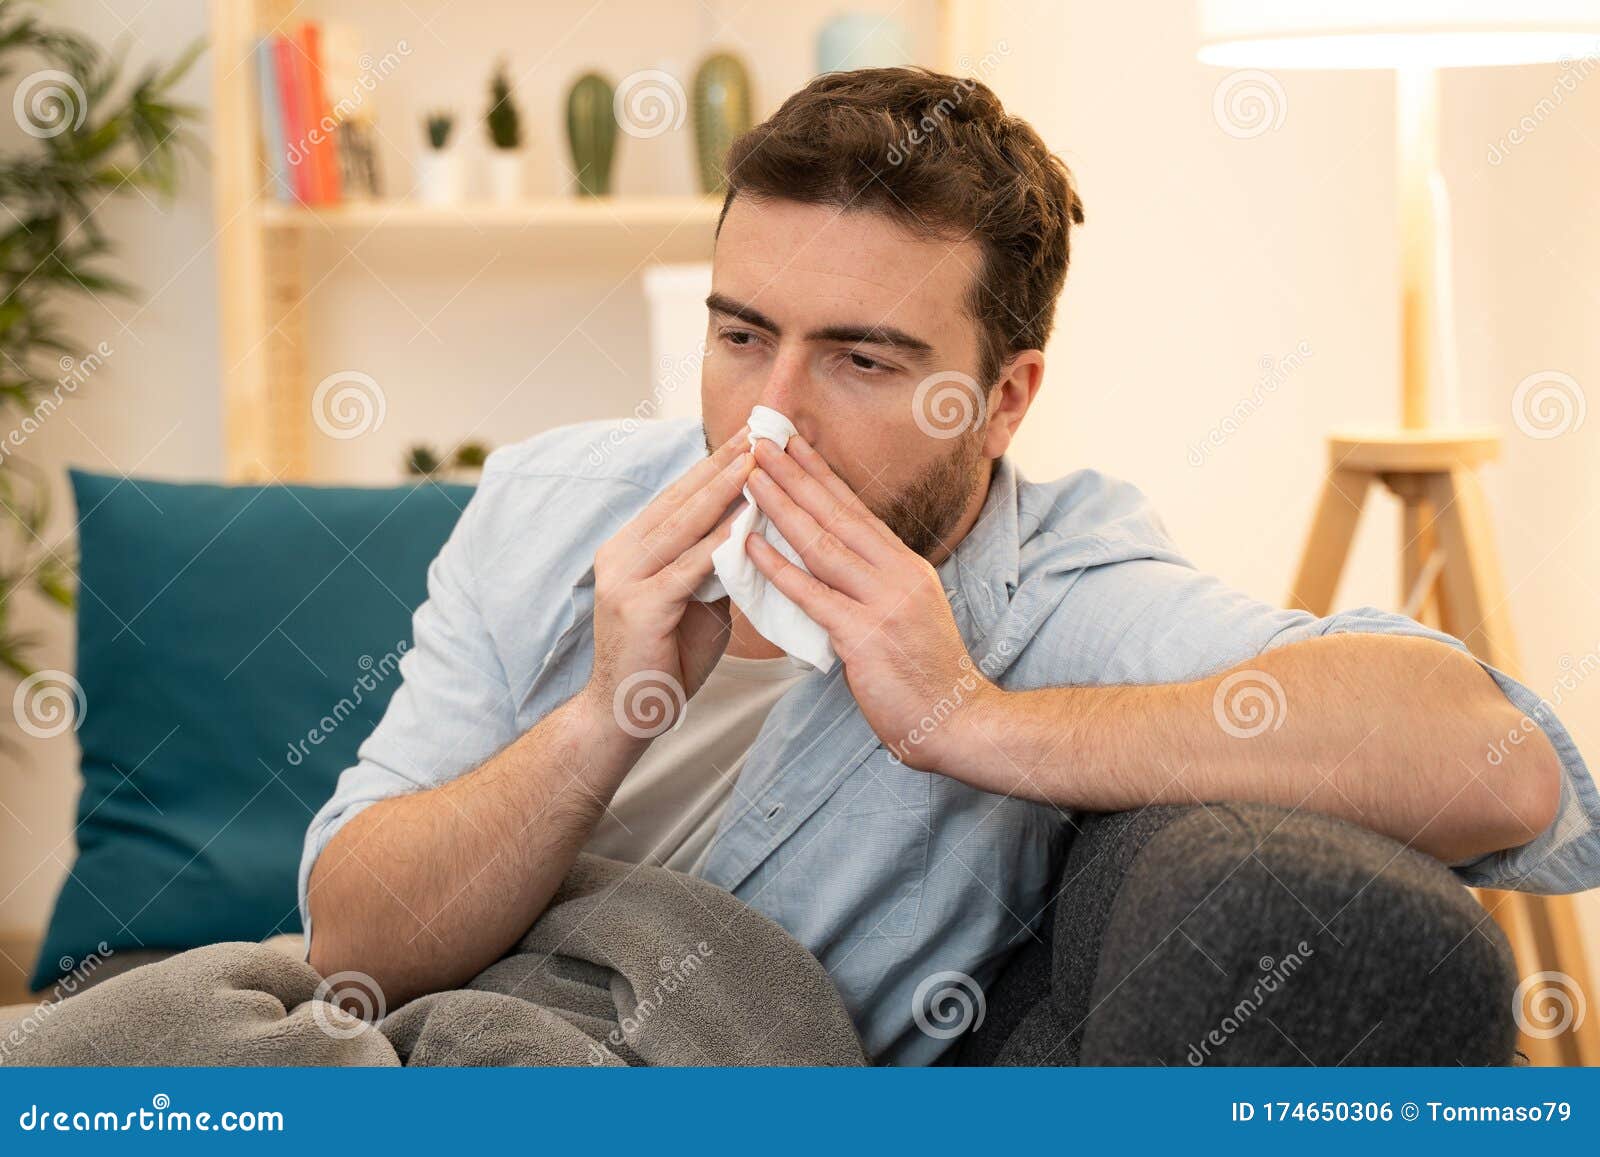 man portrait suffering cold and flu at home